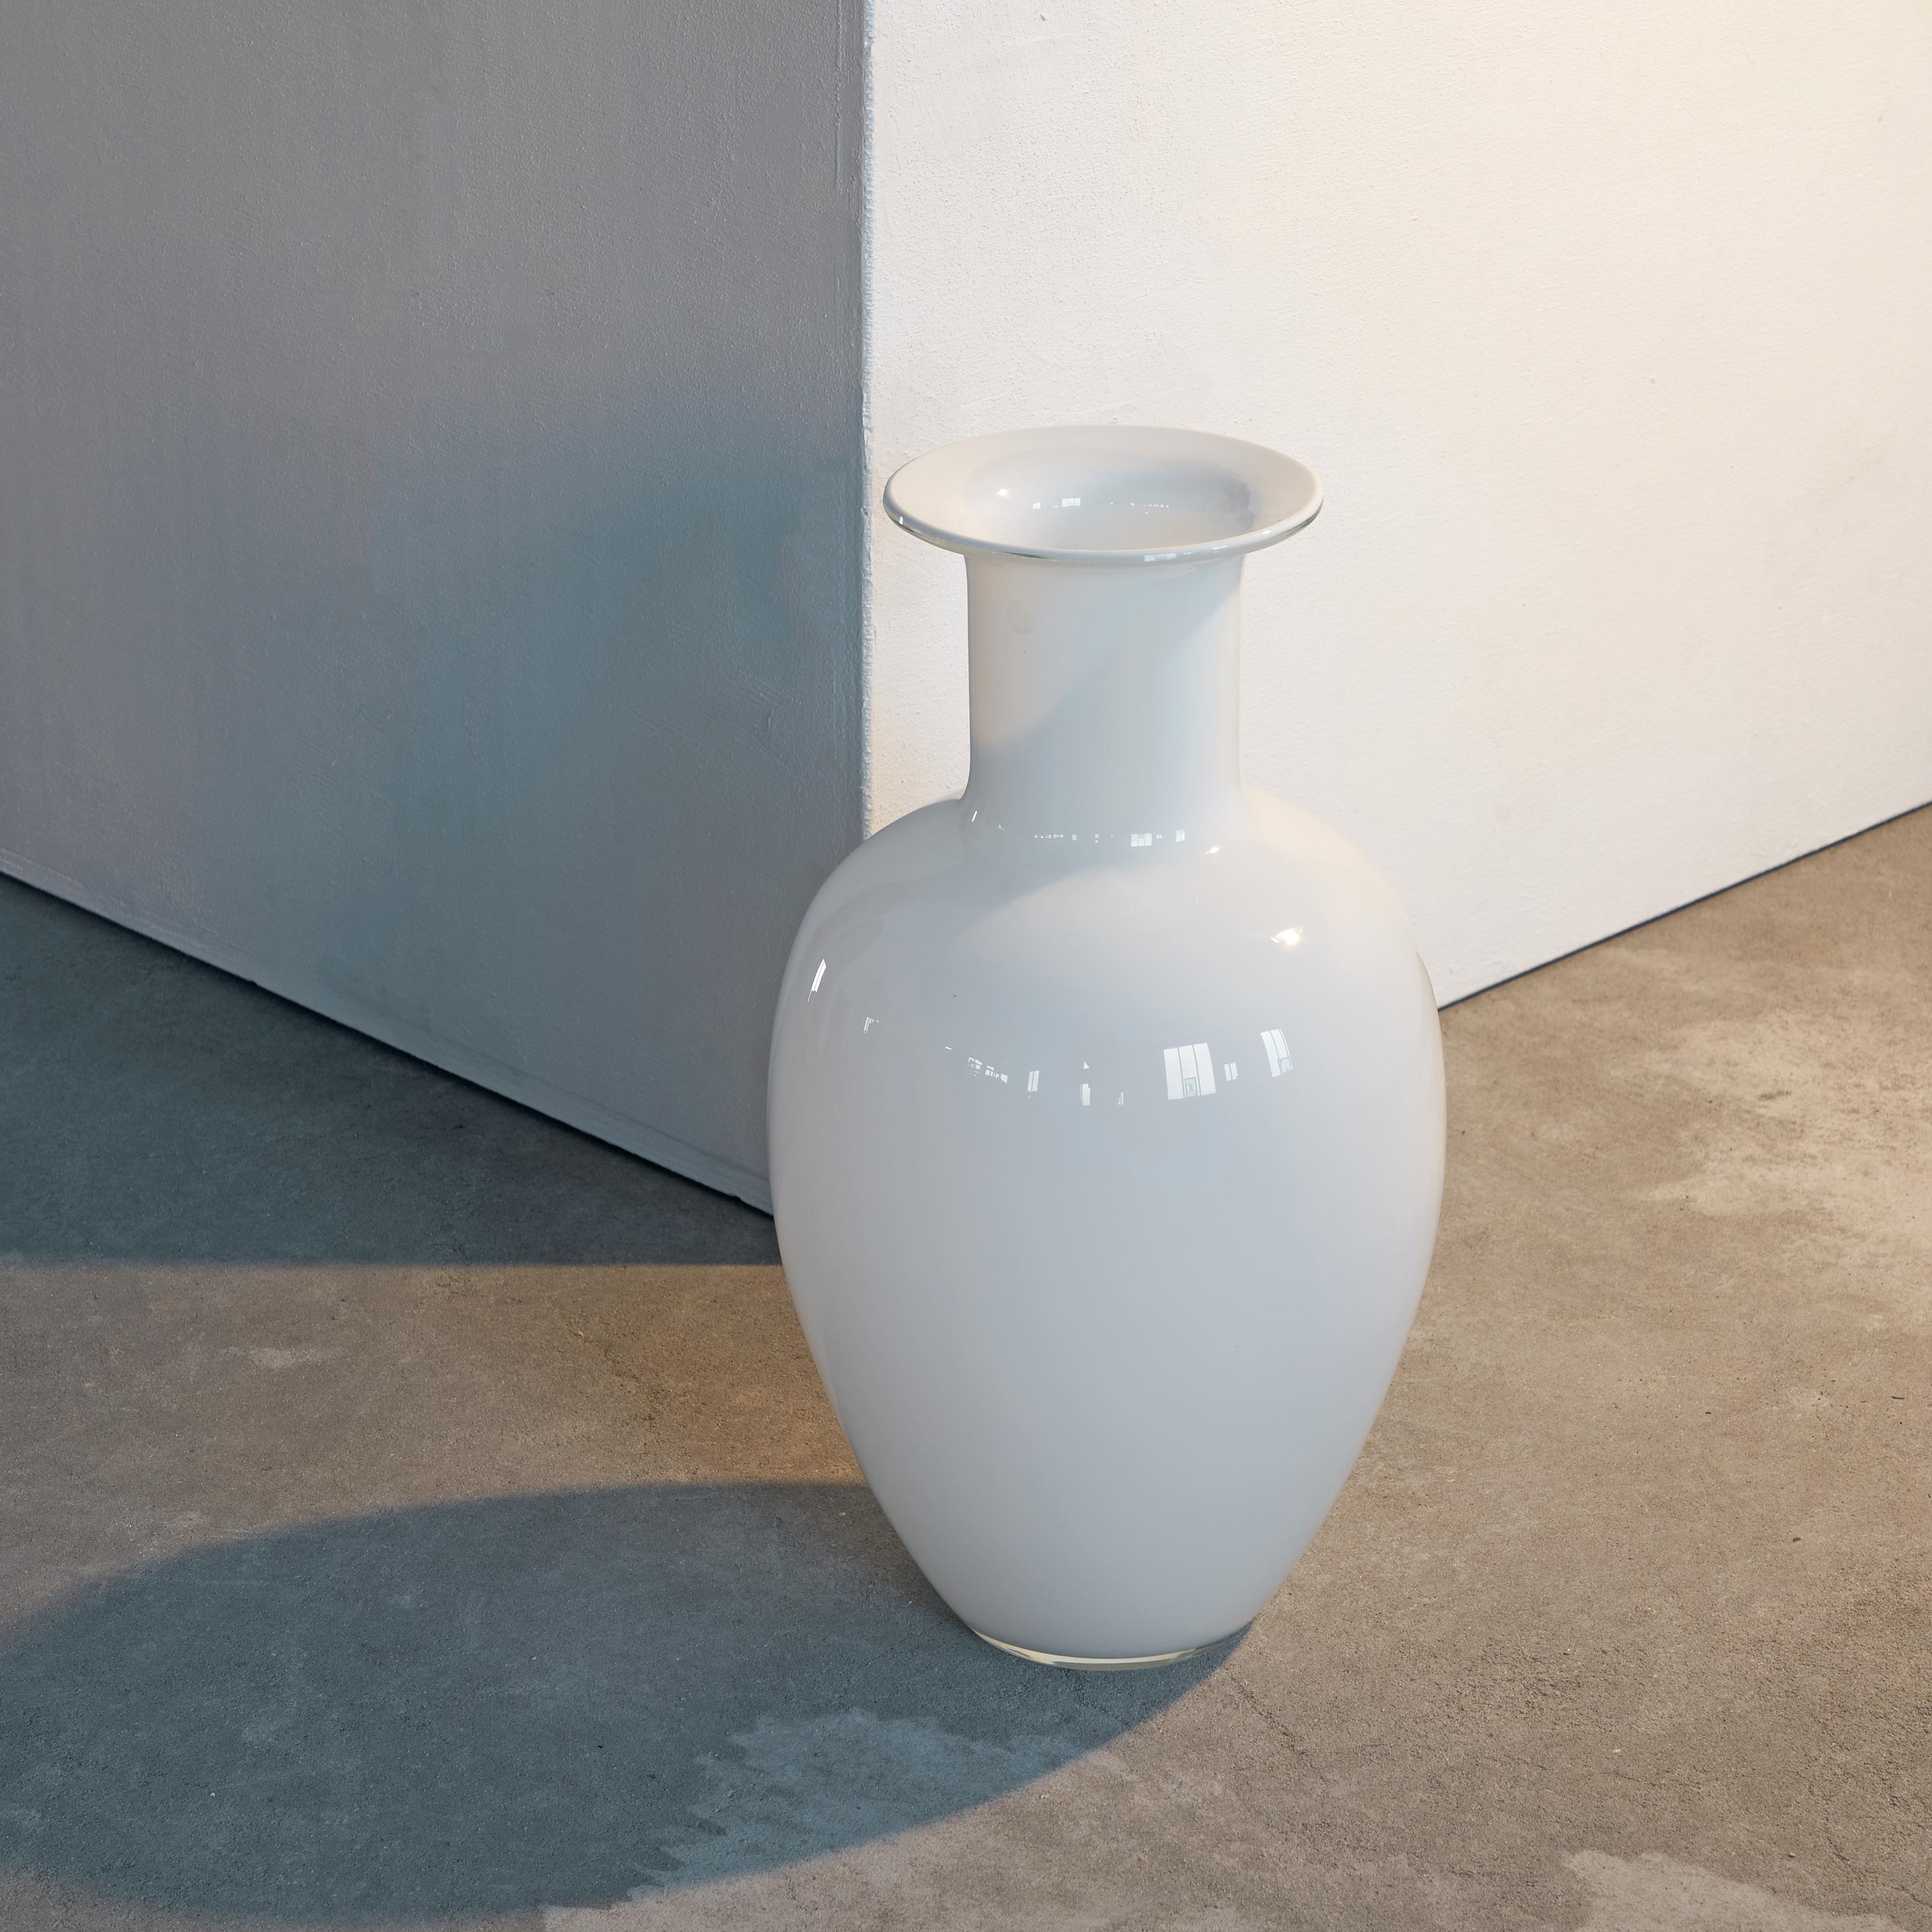 Beautiful large Murano vase in opaline glass by Venice glass maker Vistosi. 1970s, Italy.

Due to the size and appearance of this striking white vase, this is a piece suitable for any stylish interior. The shape is really well proportioned and